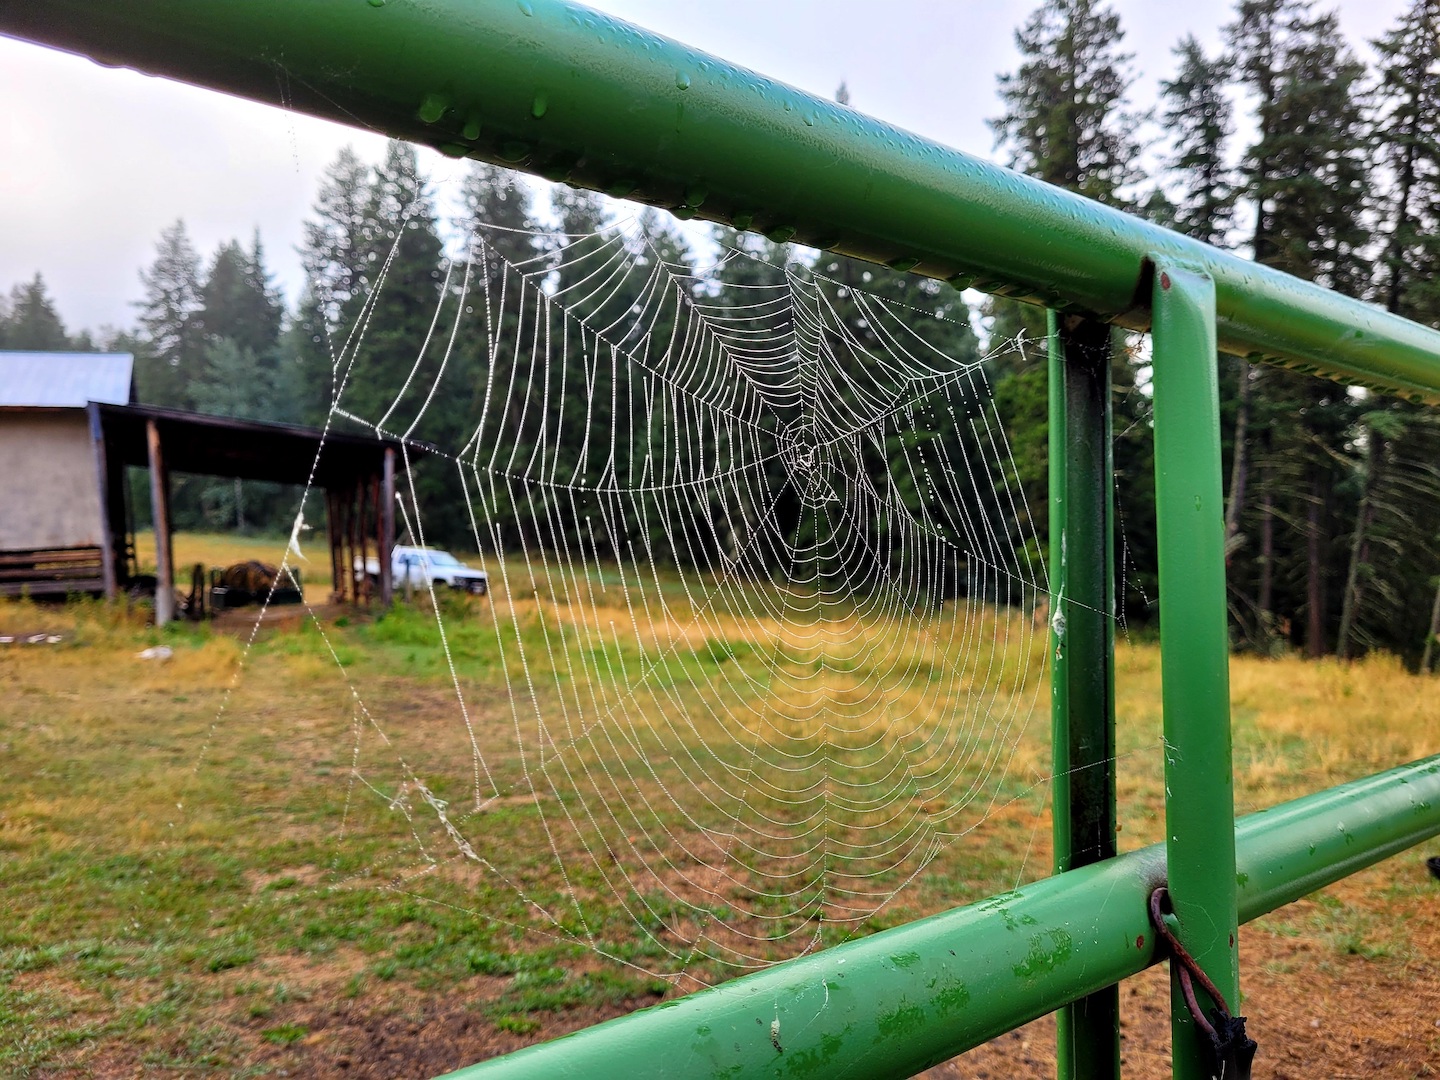 photo of a spiderweb covered in dew, on a green metal ranch gate